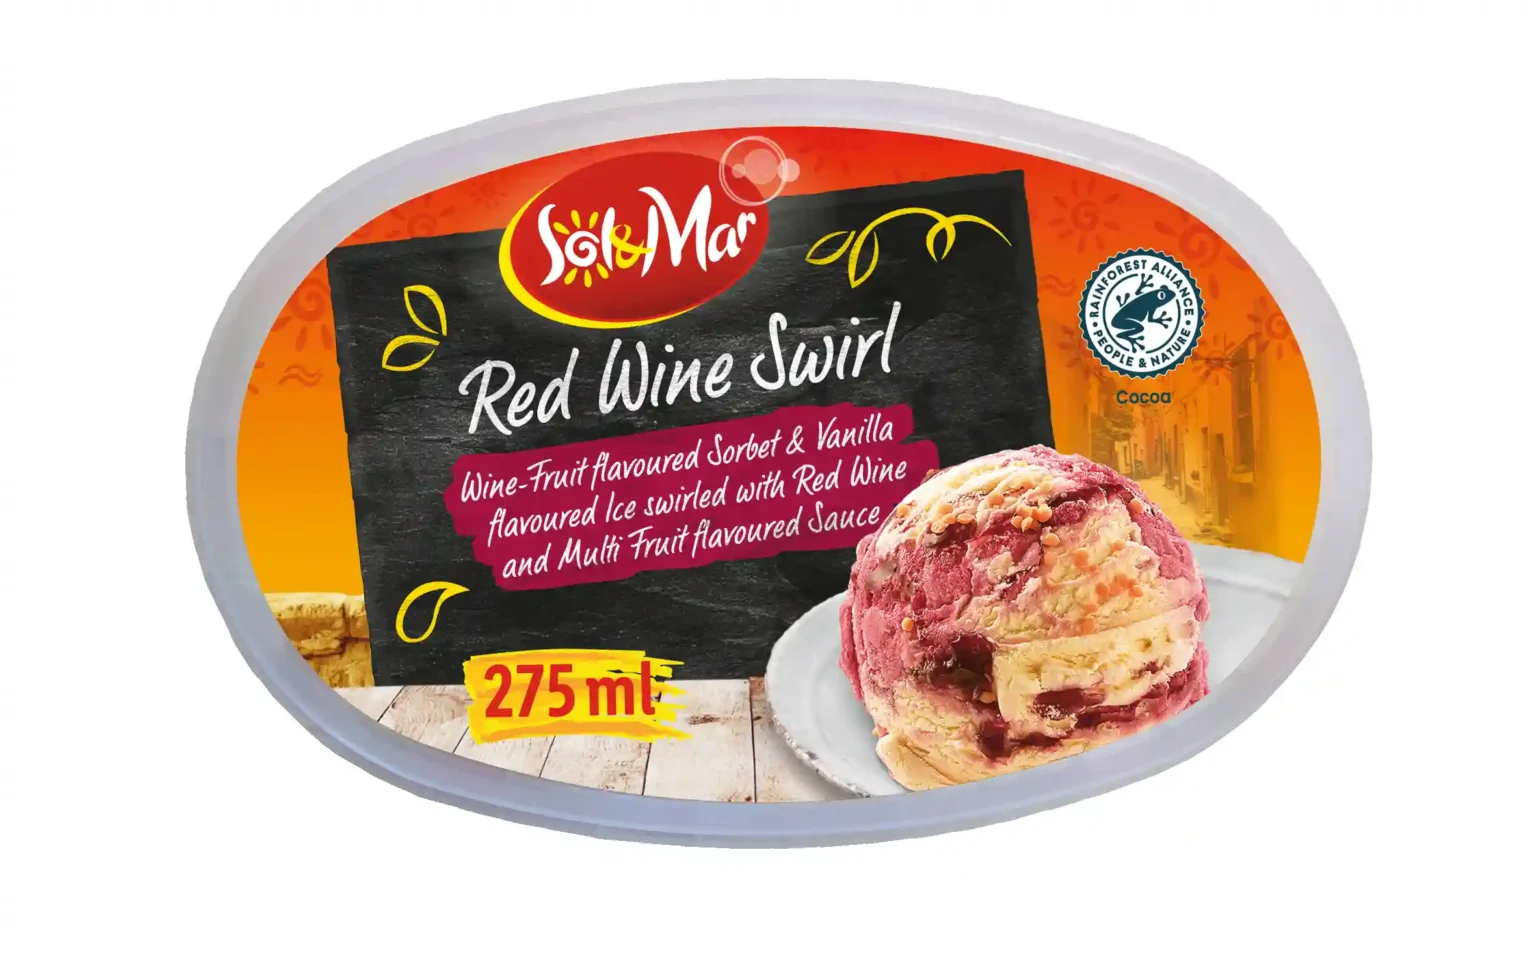 Lidl launches new ice cream flavors for summer, including Red Wine Swirl, Watermelon Swirl, and Blood Orange. Trendy treats available for £1.29 per tub.